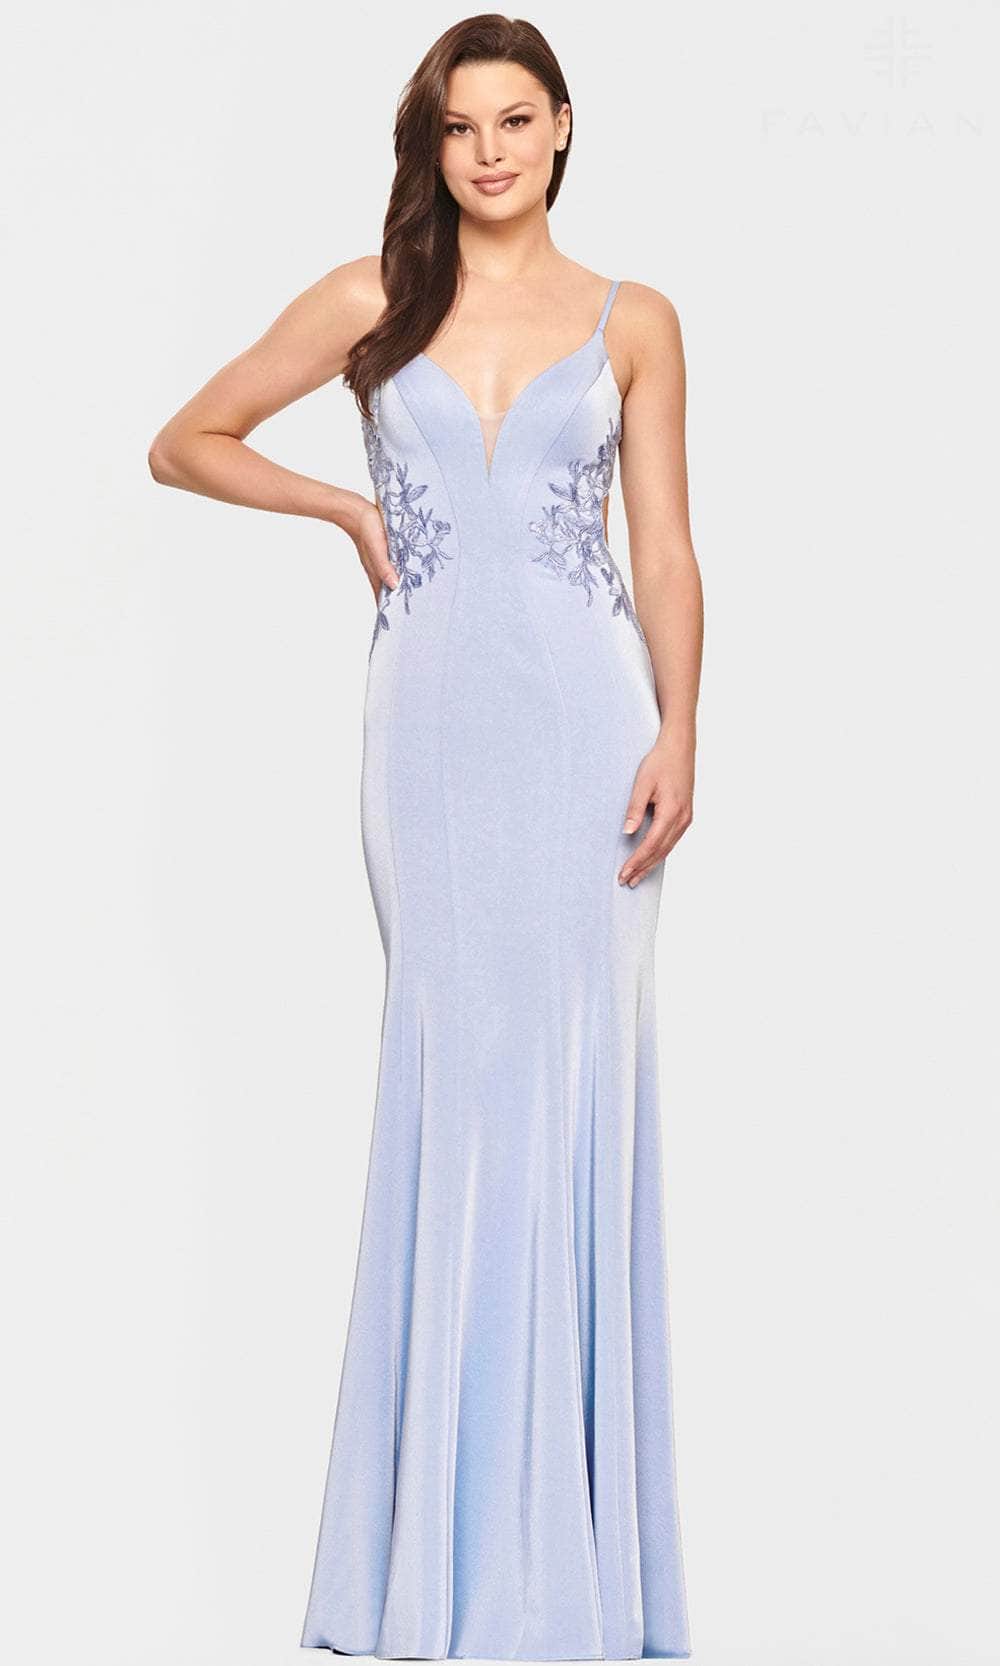 Image of Faviana S10815 - Lace Applique Cutout Evening Gown